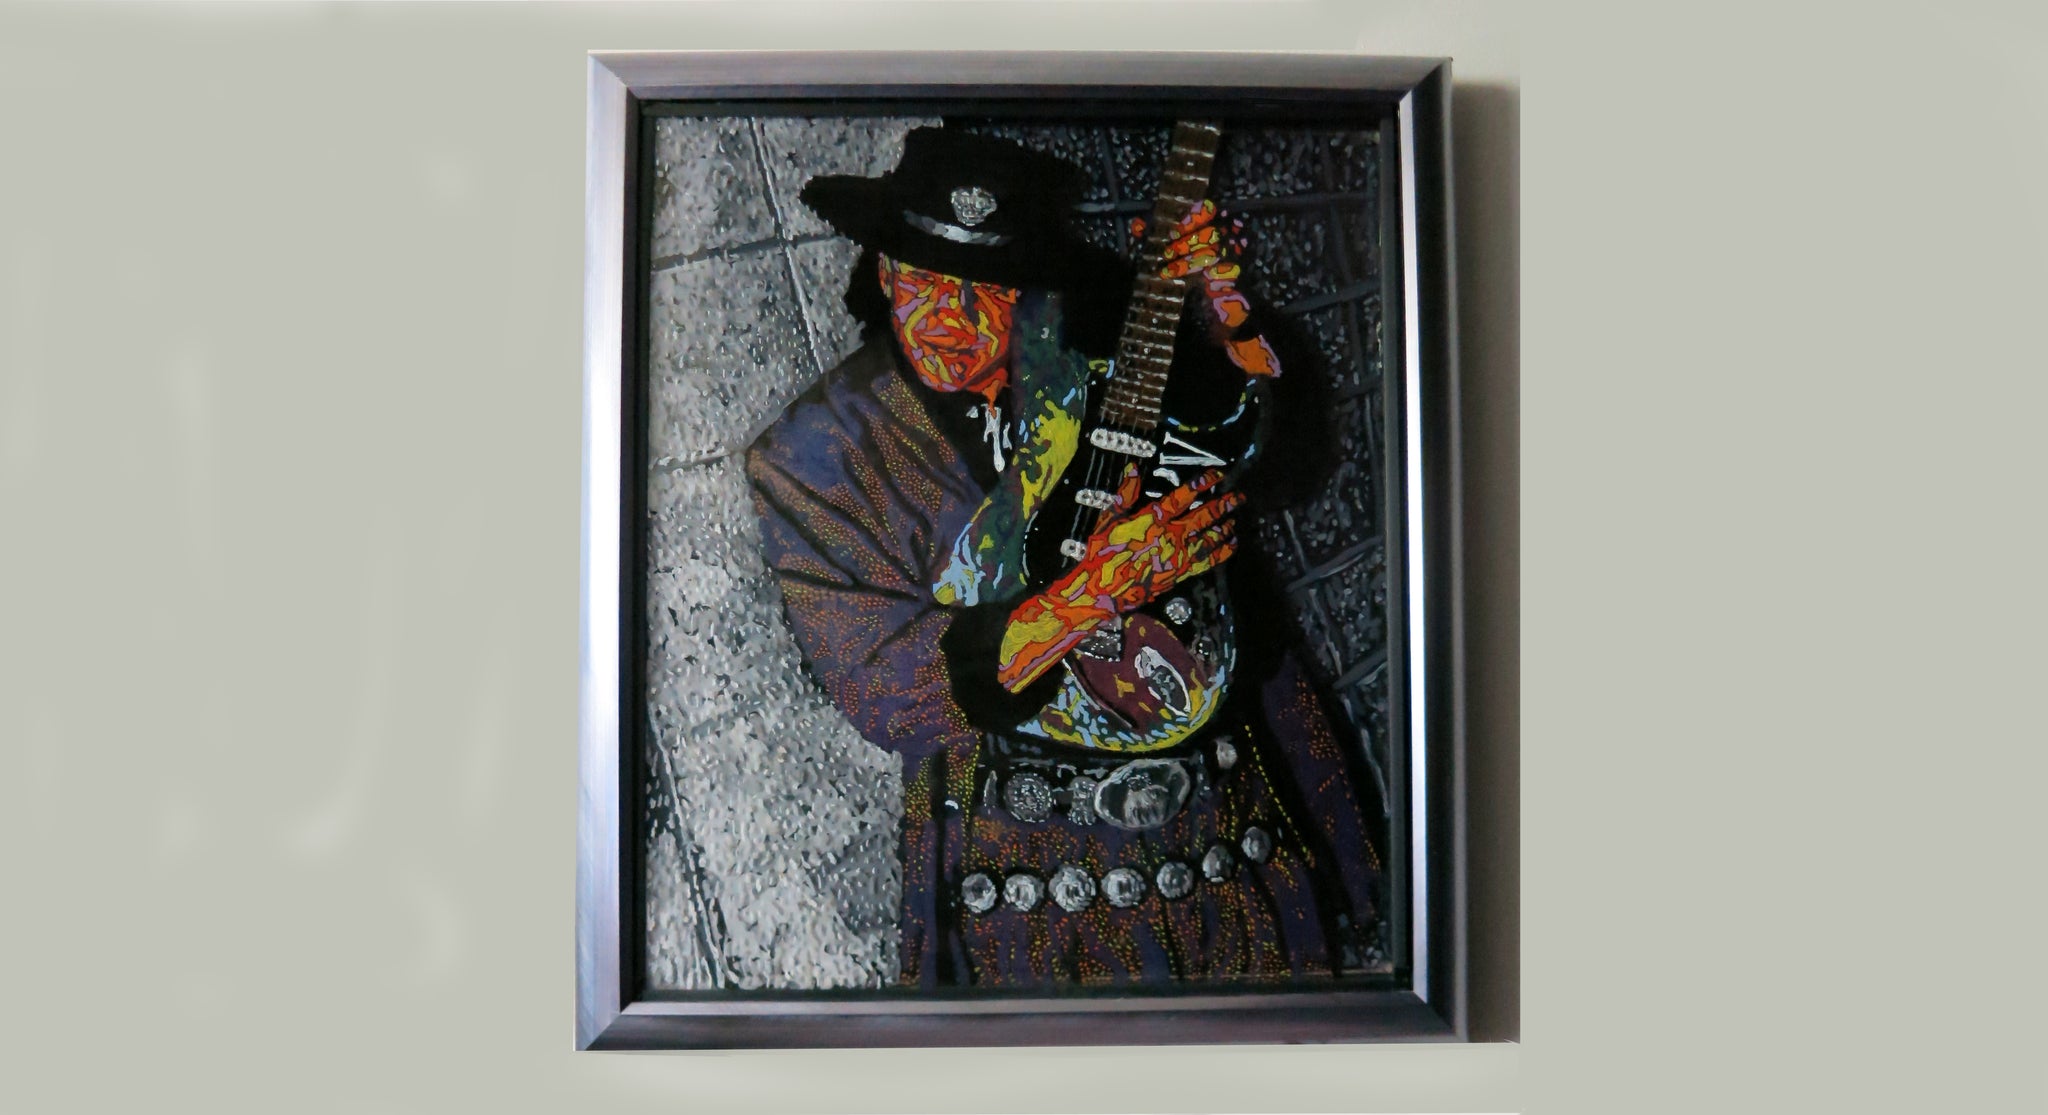 Stevie Ray Vaughan Original Painting - NOW ACCEPTING OFFERS - DM or EMAIL for Pricing or Private Viewing